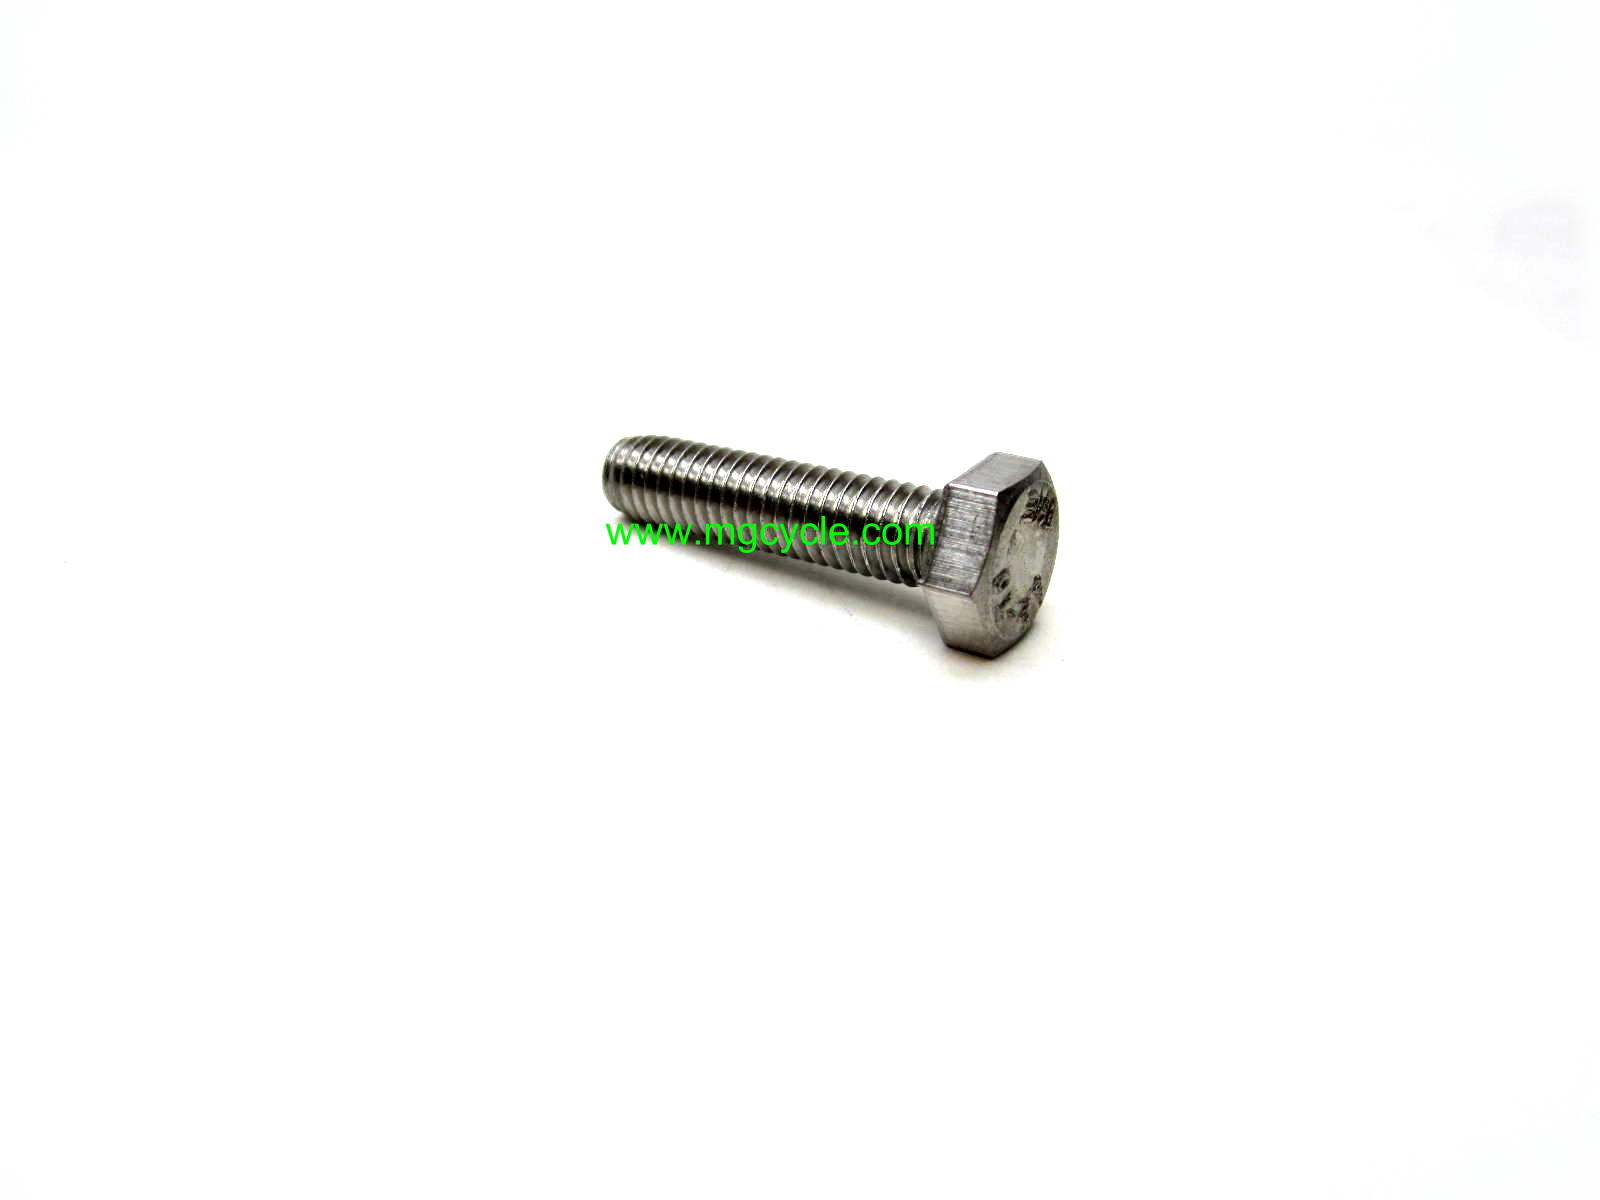 6mm hex head bolt stainless M6x1.0x25